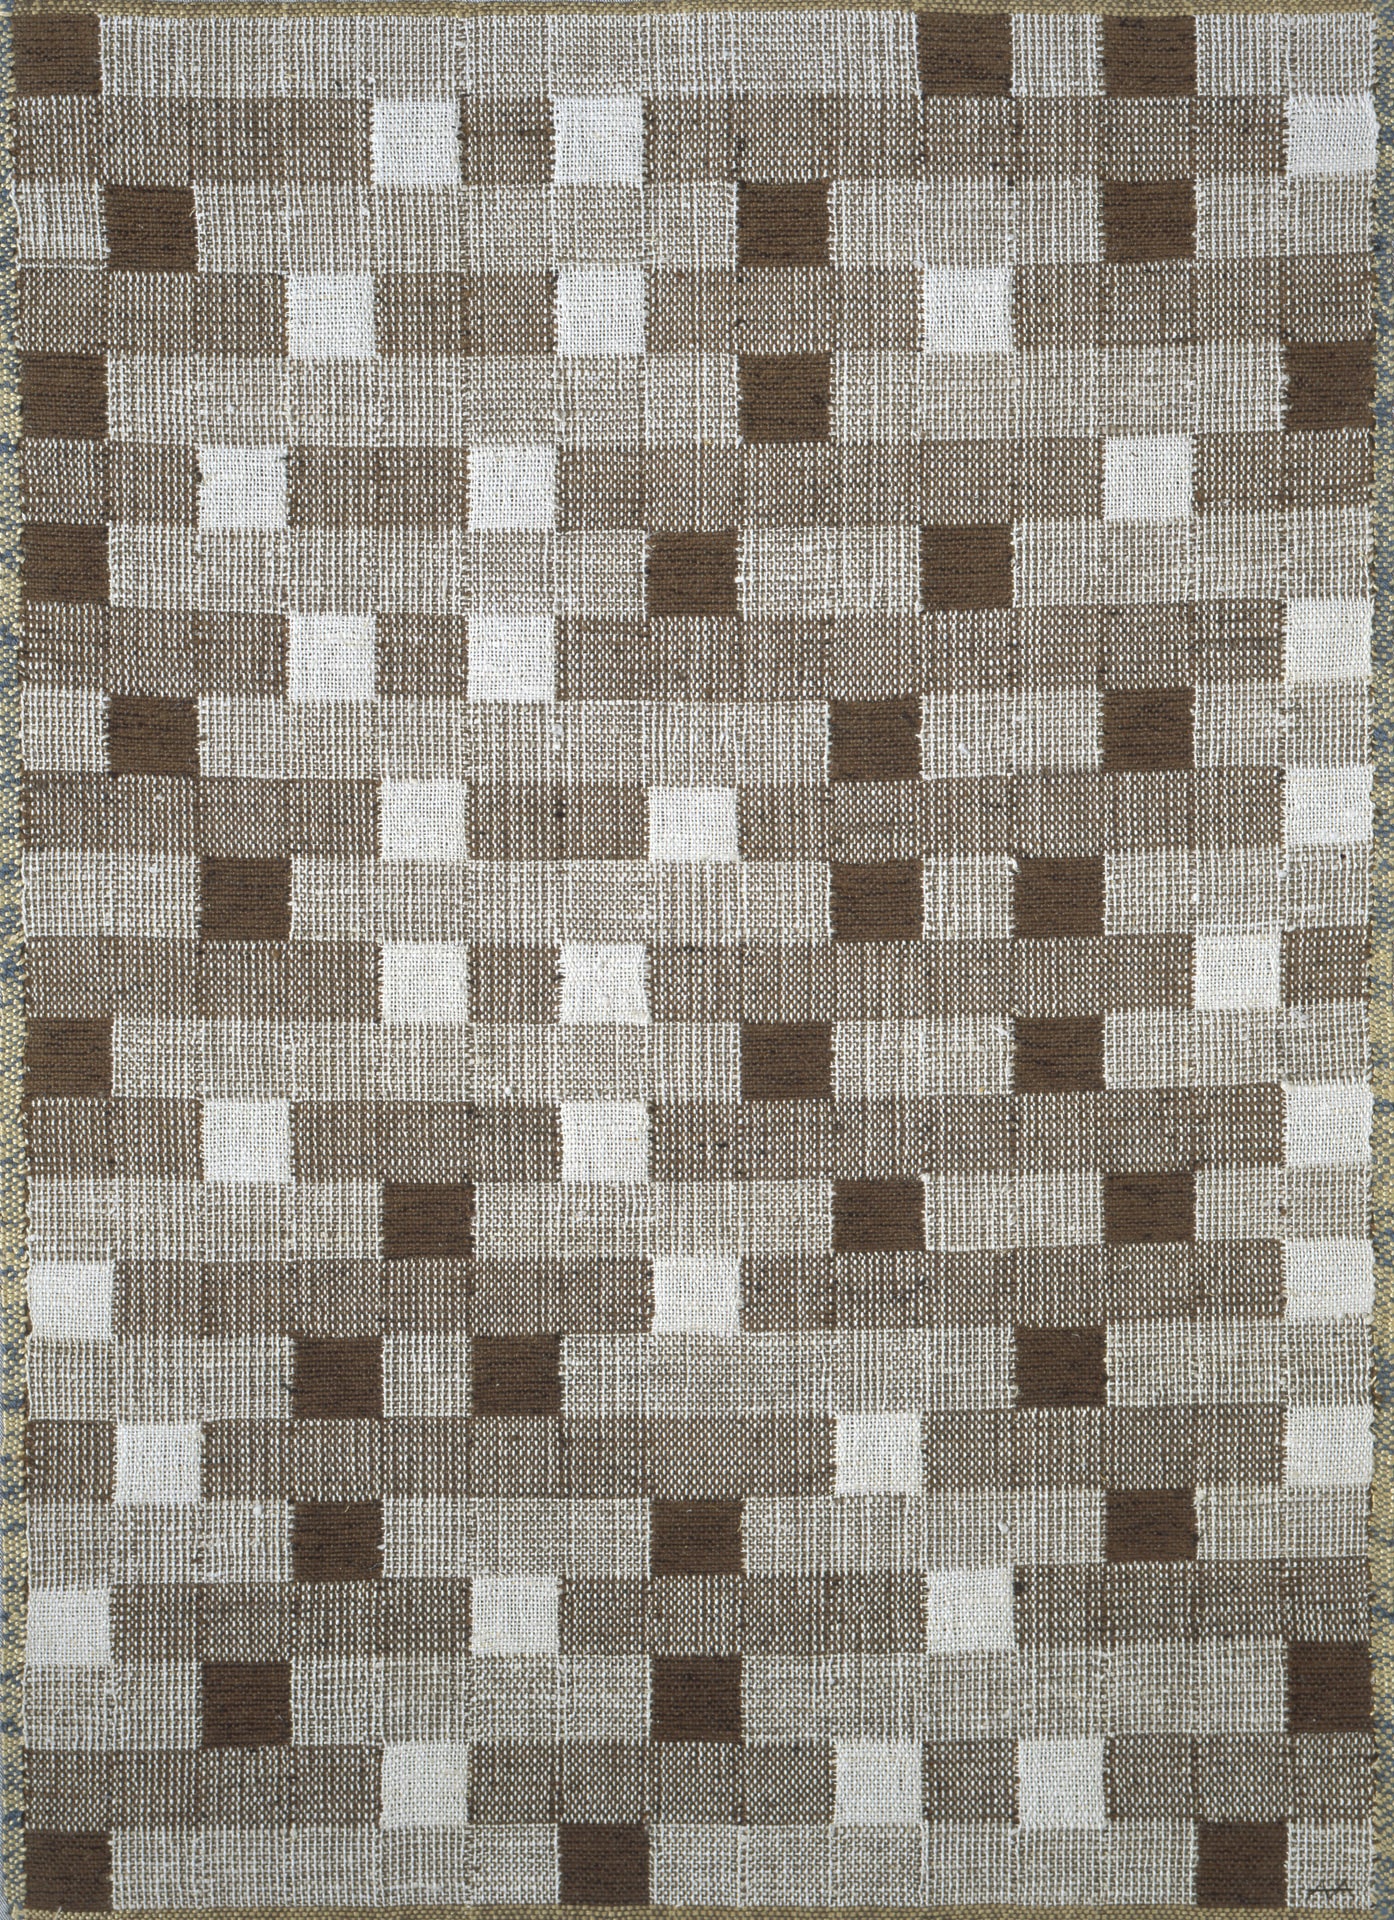 a tapestry with checked grey and brown squares